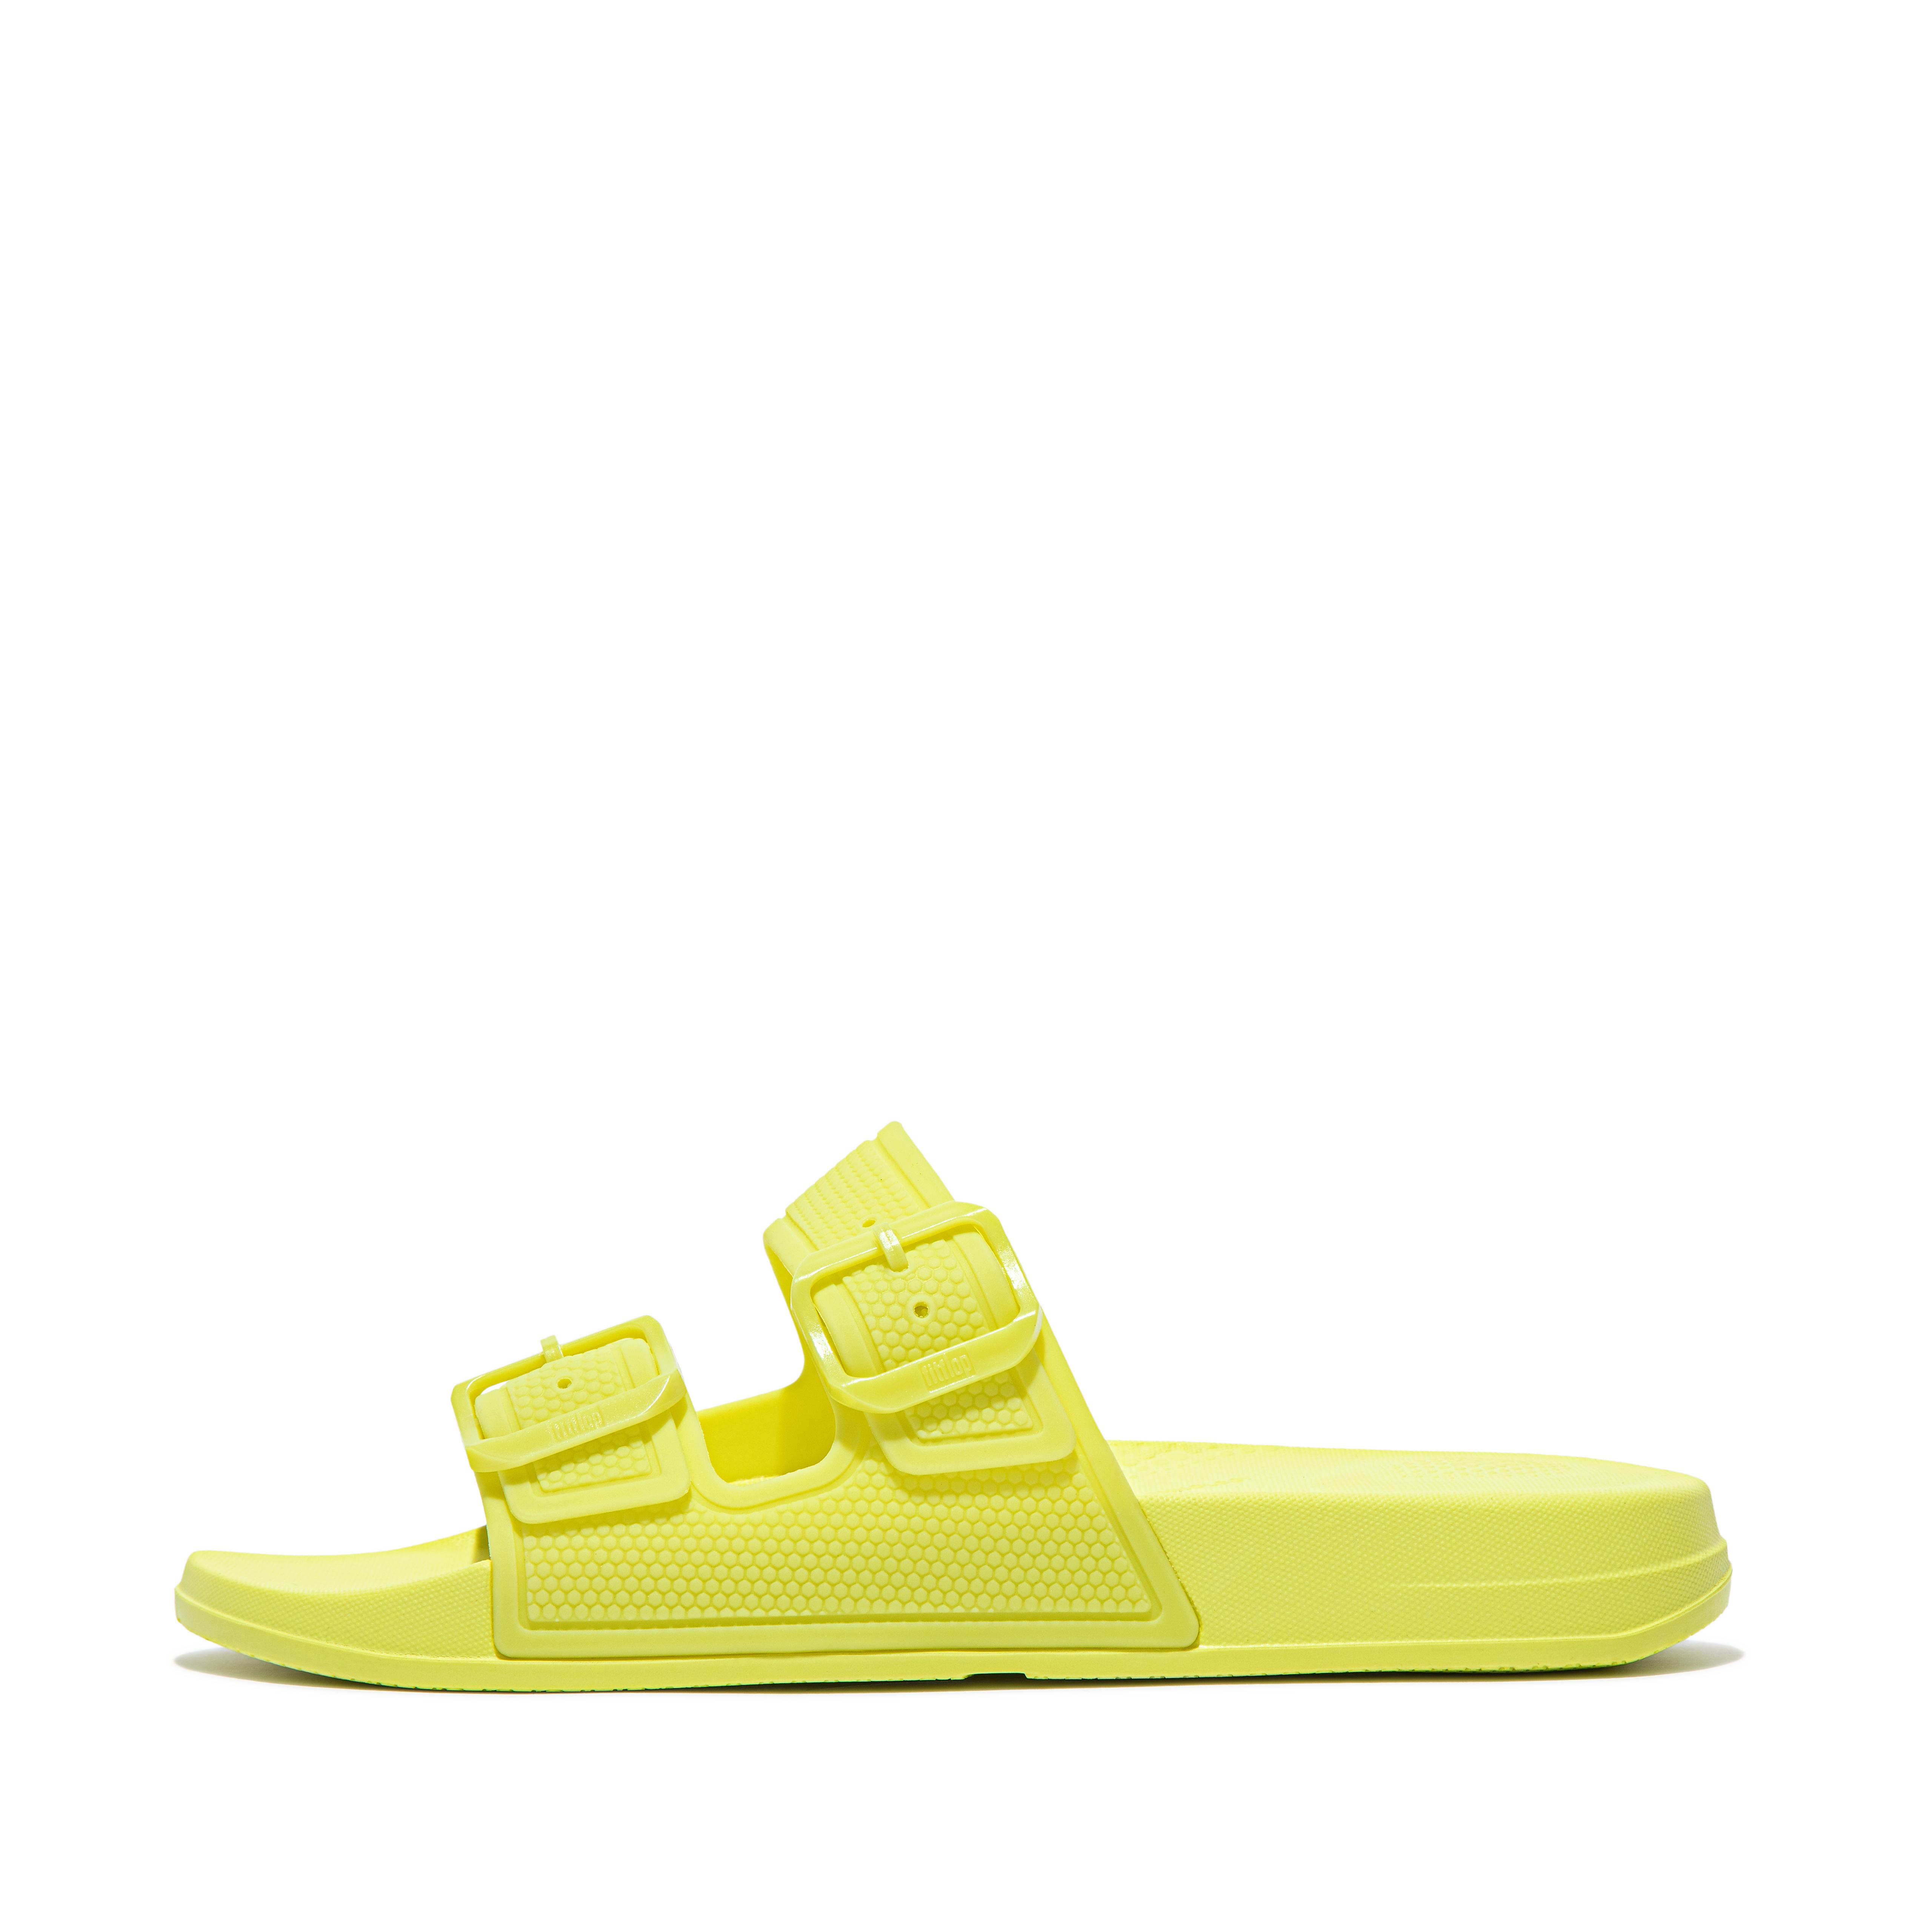 Women's Iqushion Rubber-Tpu Slides | FitFlop US